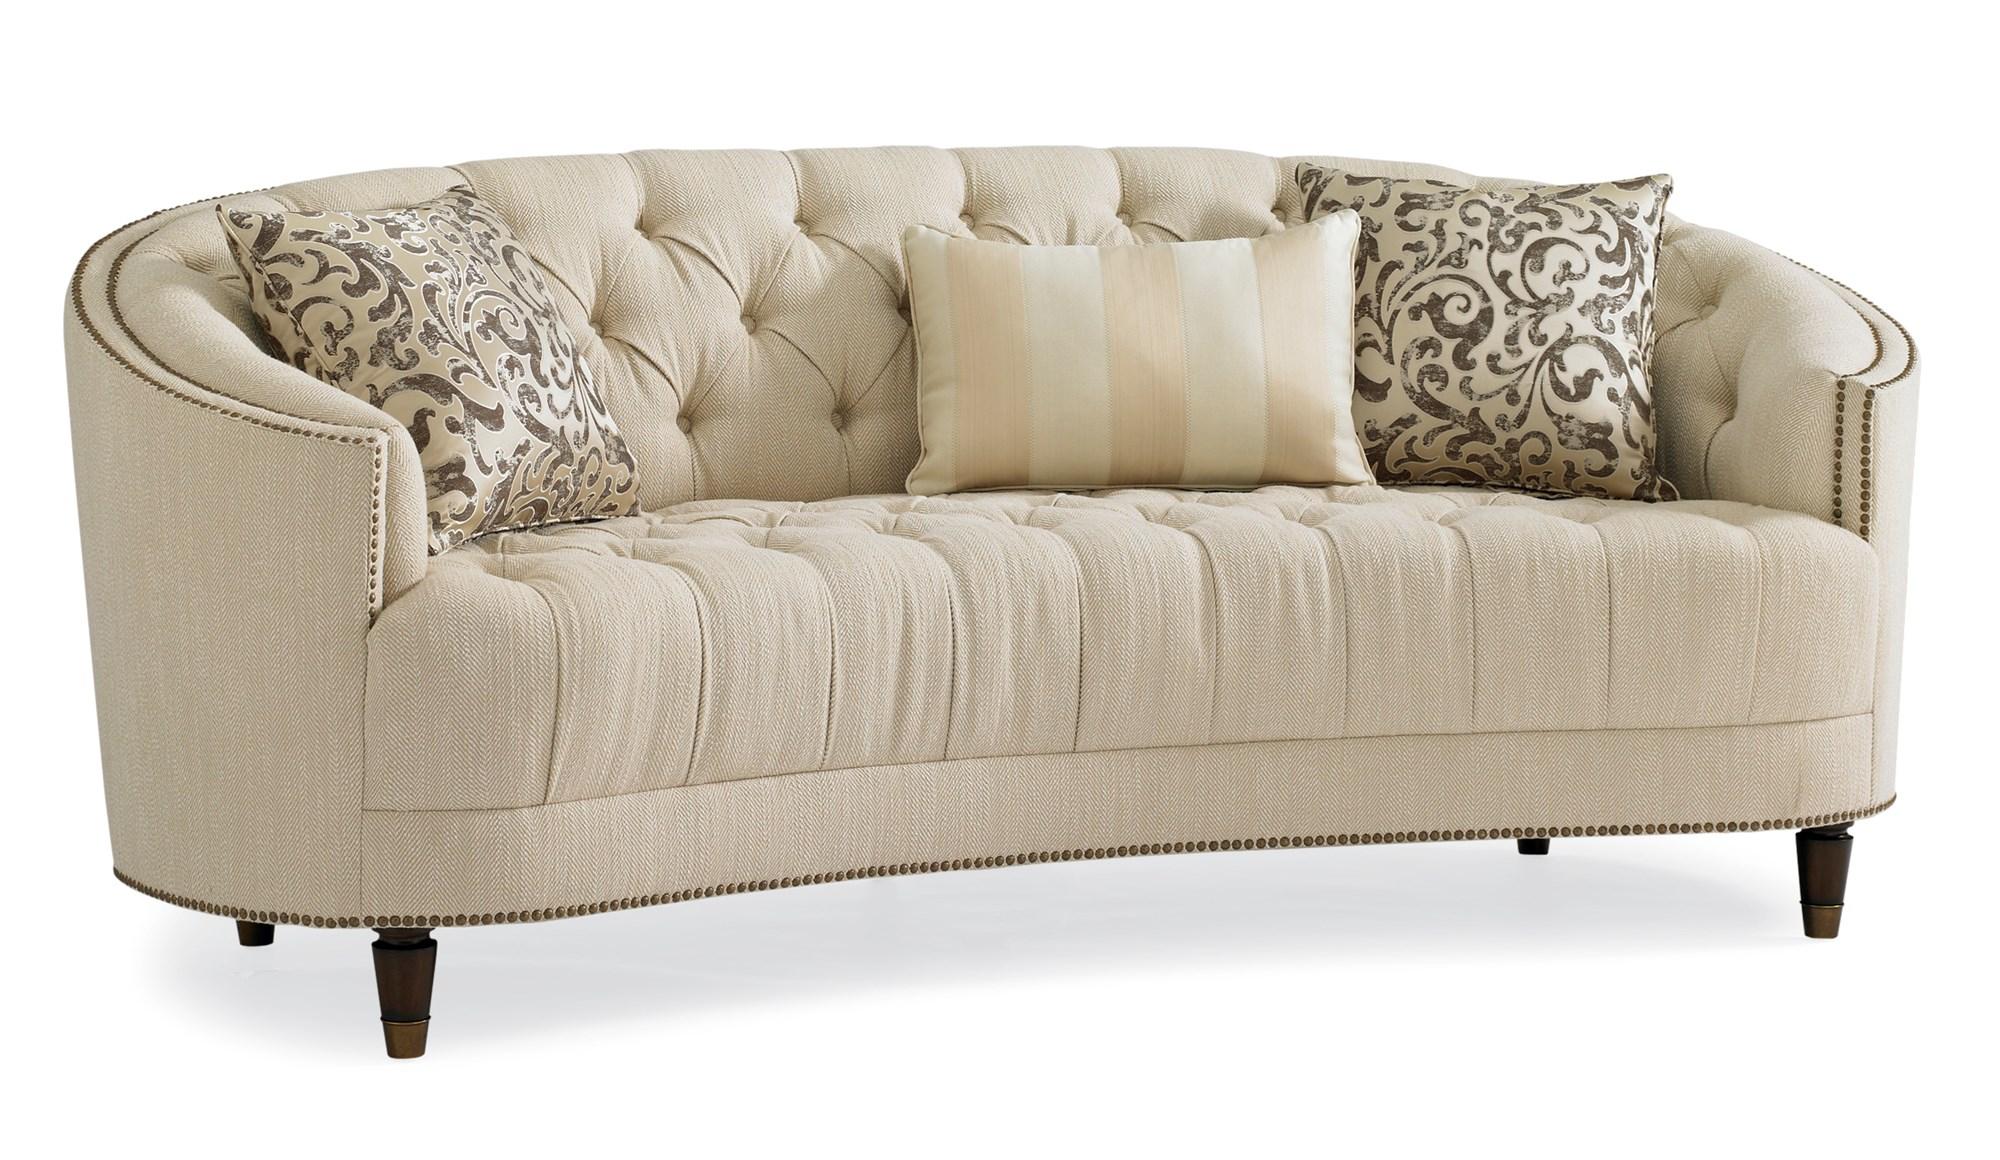 

    
Button-Tufted Natural Textured Herringbone Fabric Sofa Set 2Pcs CLASSIC ELEGANCE by Caracole
